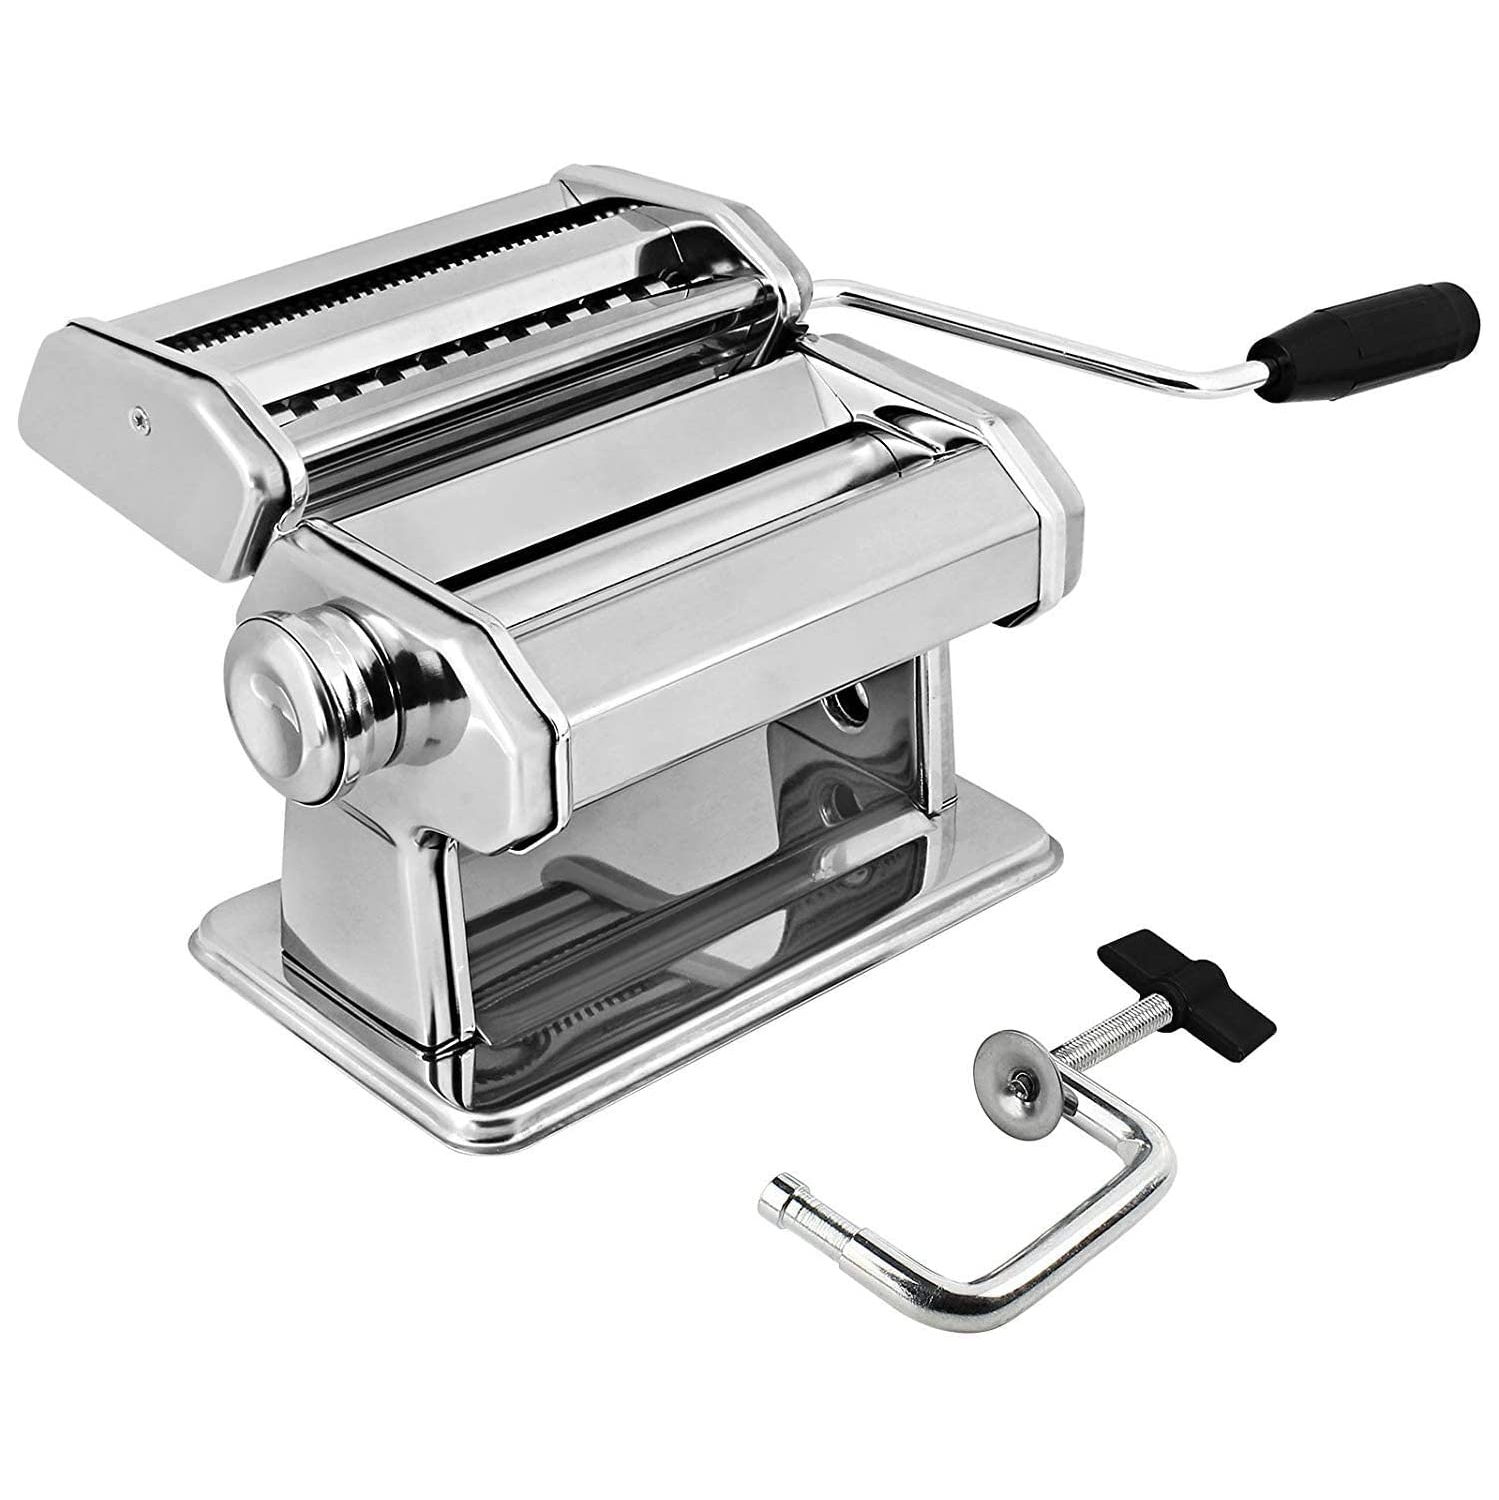 Stainless Steel Manual Pasta Maker Machine | with Adjustable Thickness Settings | Perfect for Professional